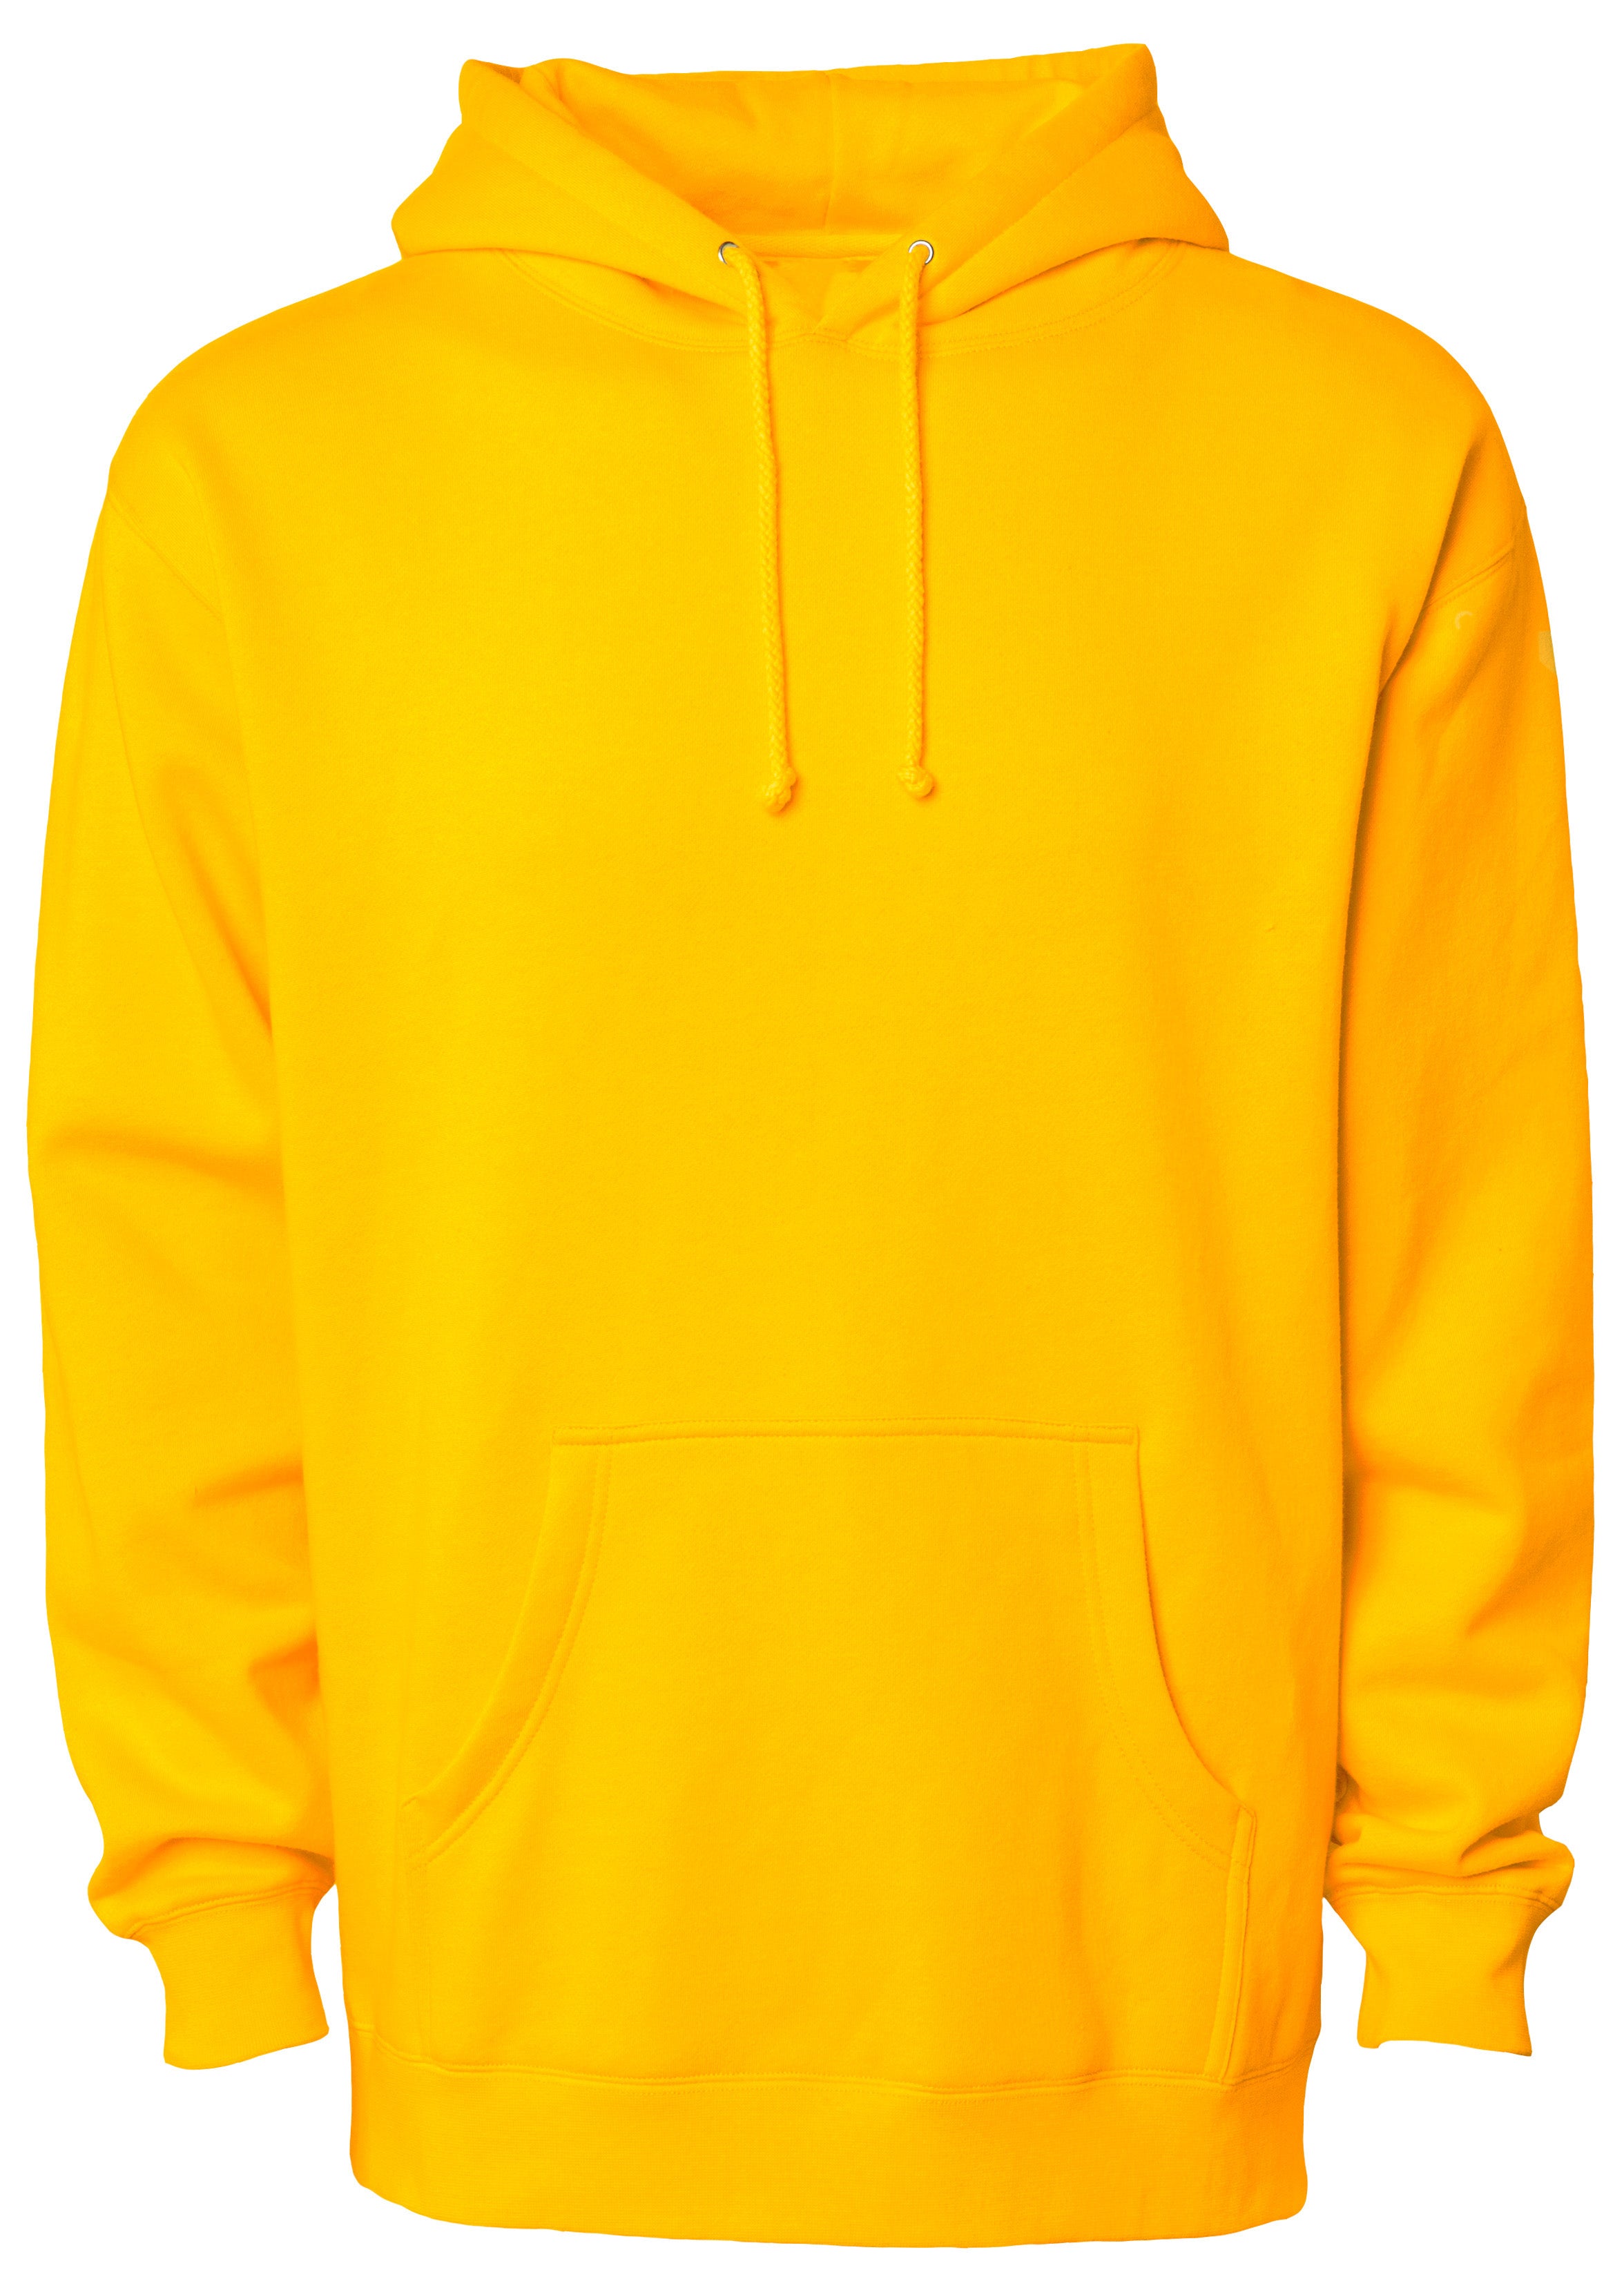 Stand Out in Style: Heavyweight Hoodies in Vibrant Safety Colors